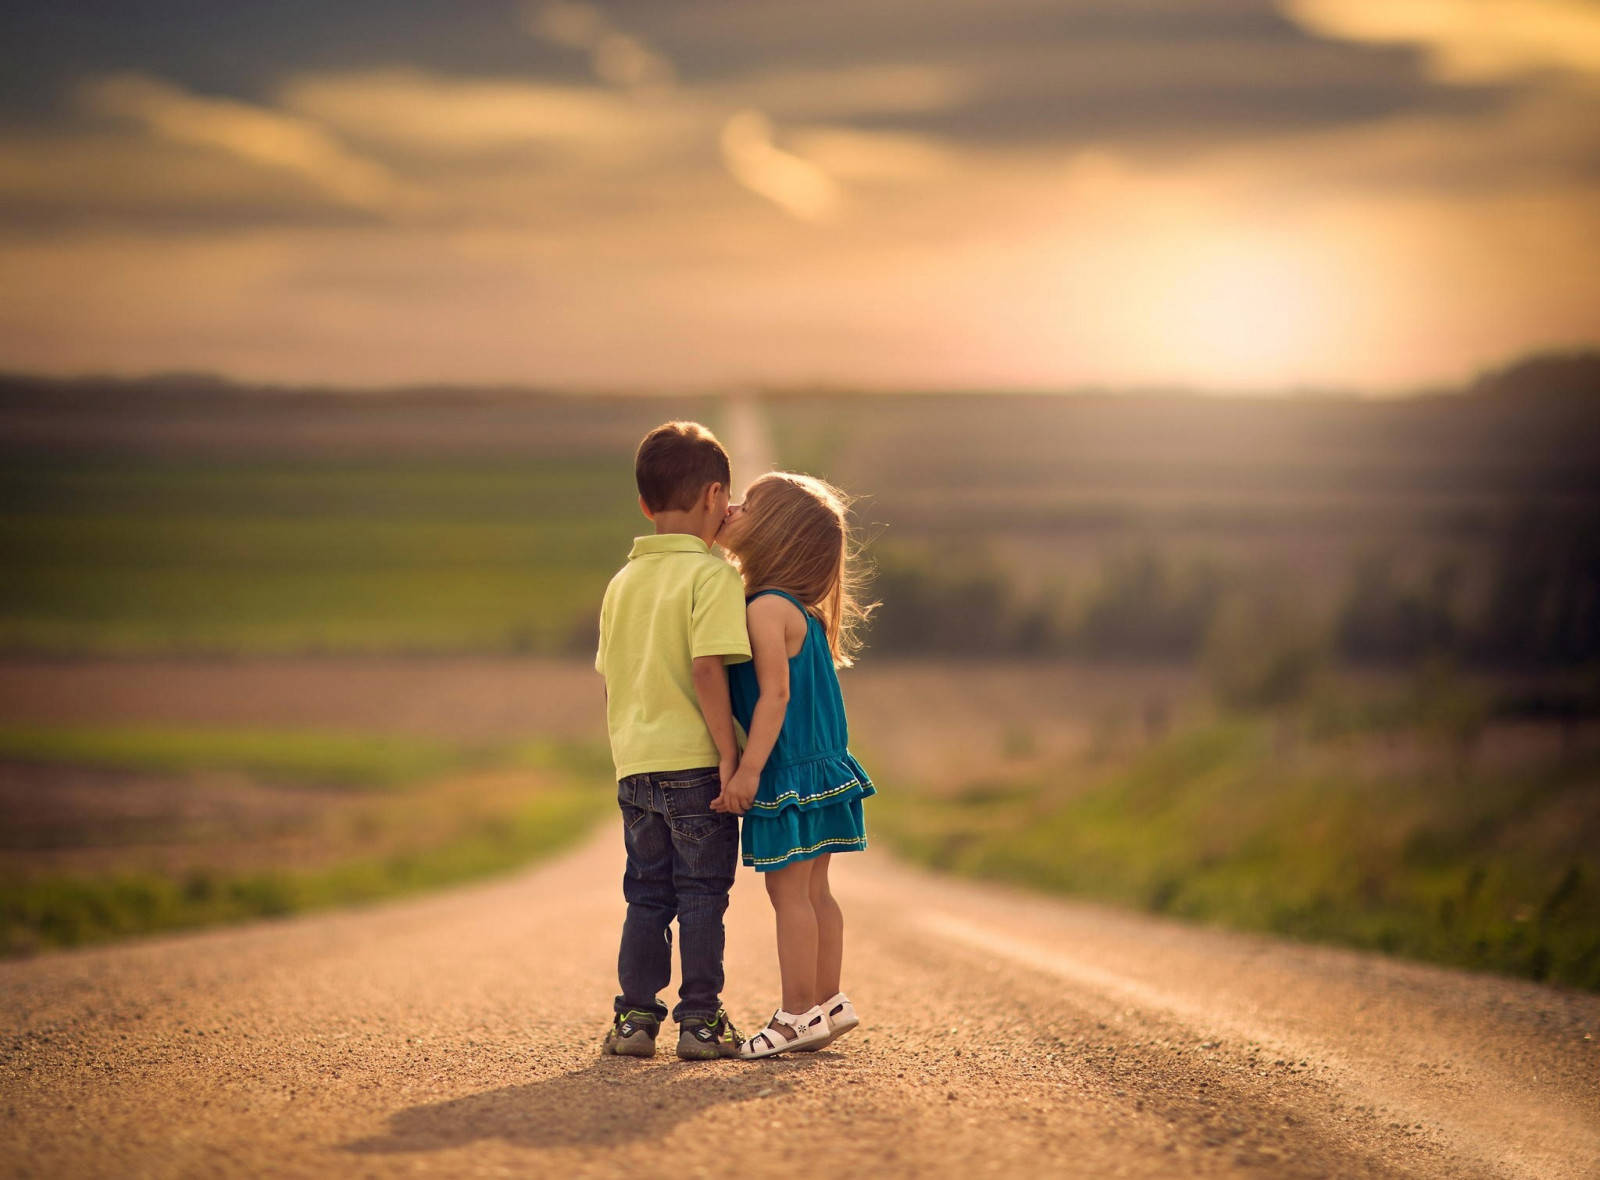 Kids Holding Hands With A Kiss Background